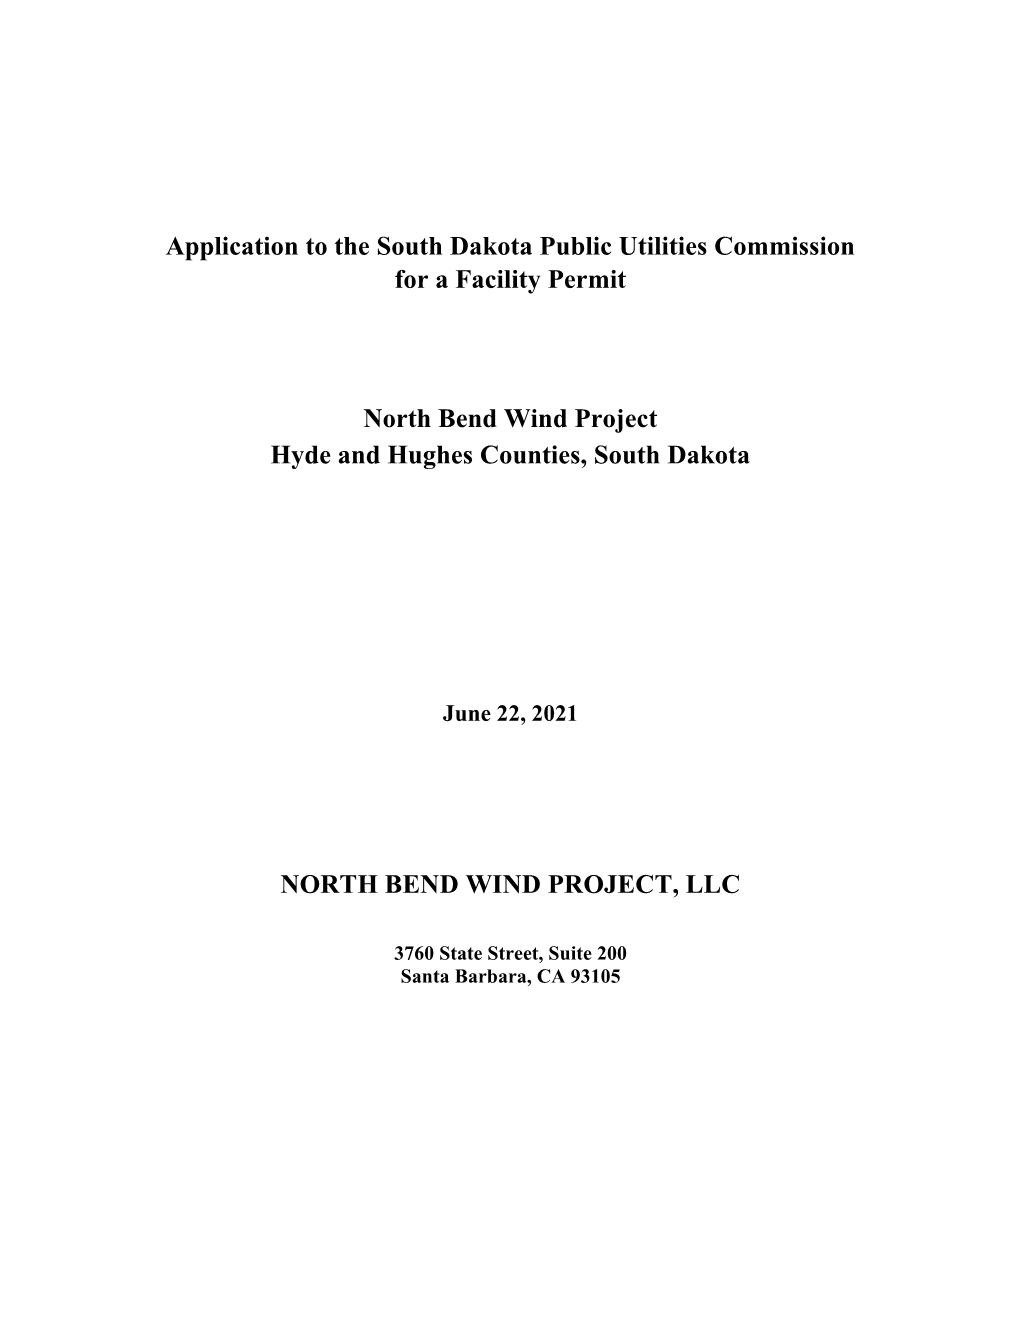 Application to the South Dakota Public Utilities Commission for a Facility Permit